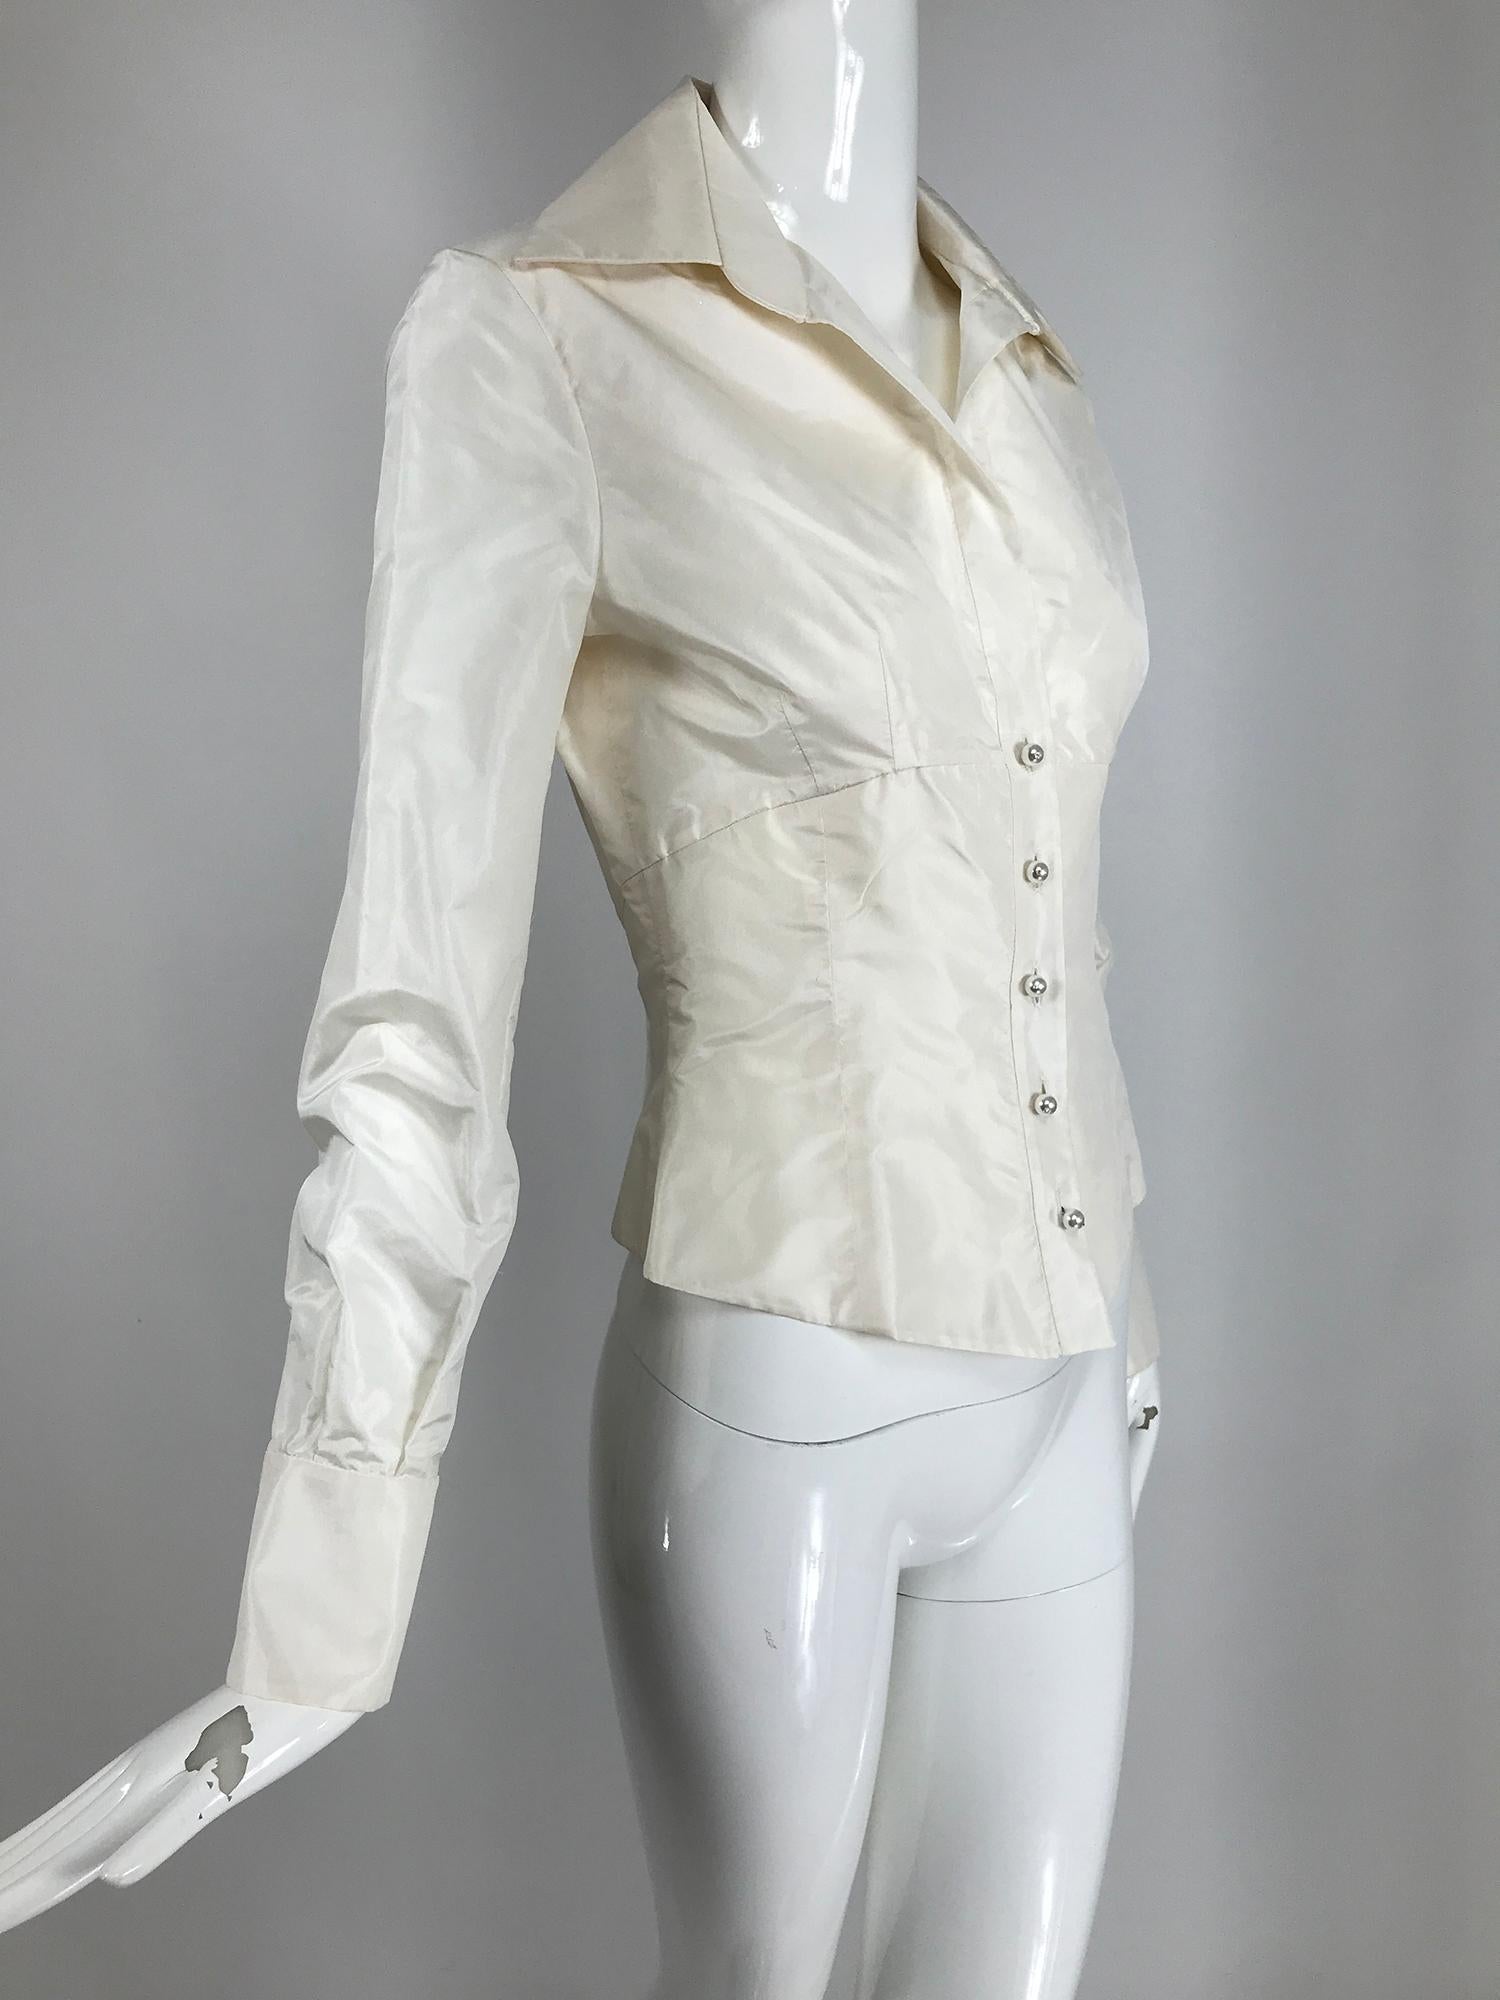 Valentino off white silk fitted blouse with long sleeves and wing collar. Darted bust and corset style waist. The back is cropped. Long sleeves have deep cuffs with button cuffs. Unlined. Marked size 6. 
     In excellent wearable condition.  All